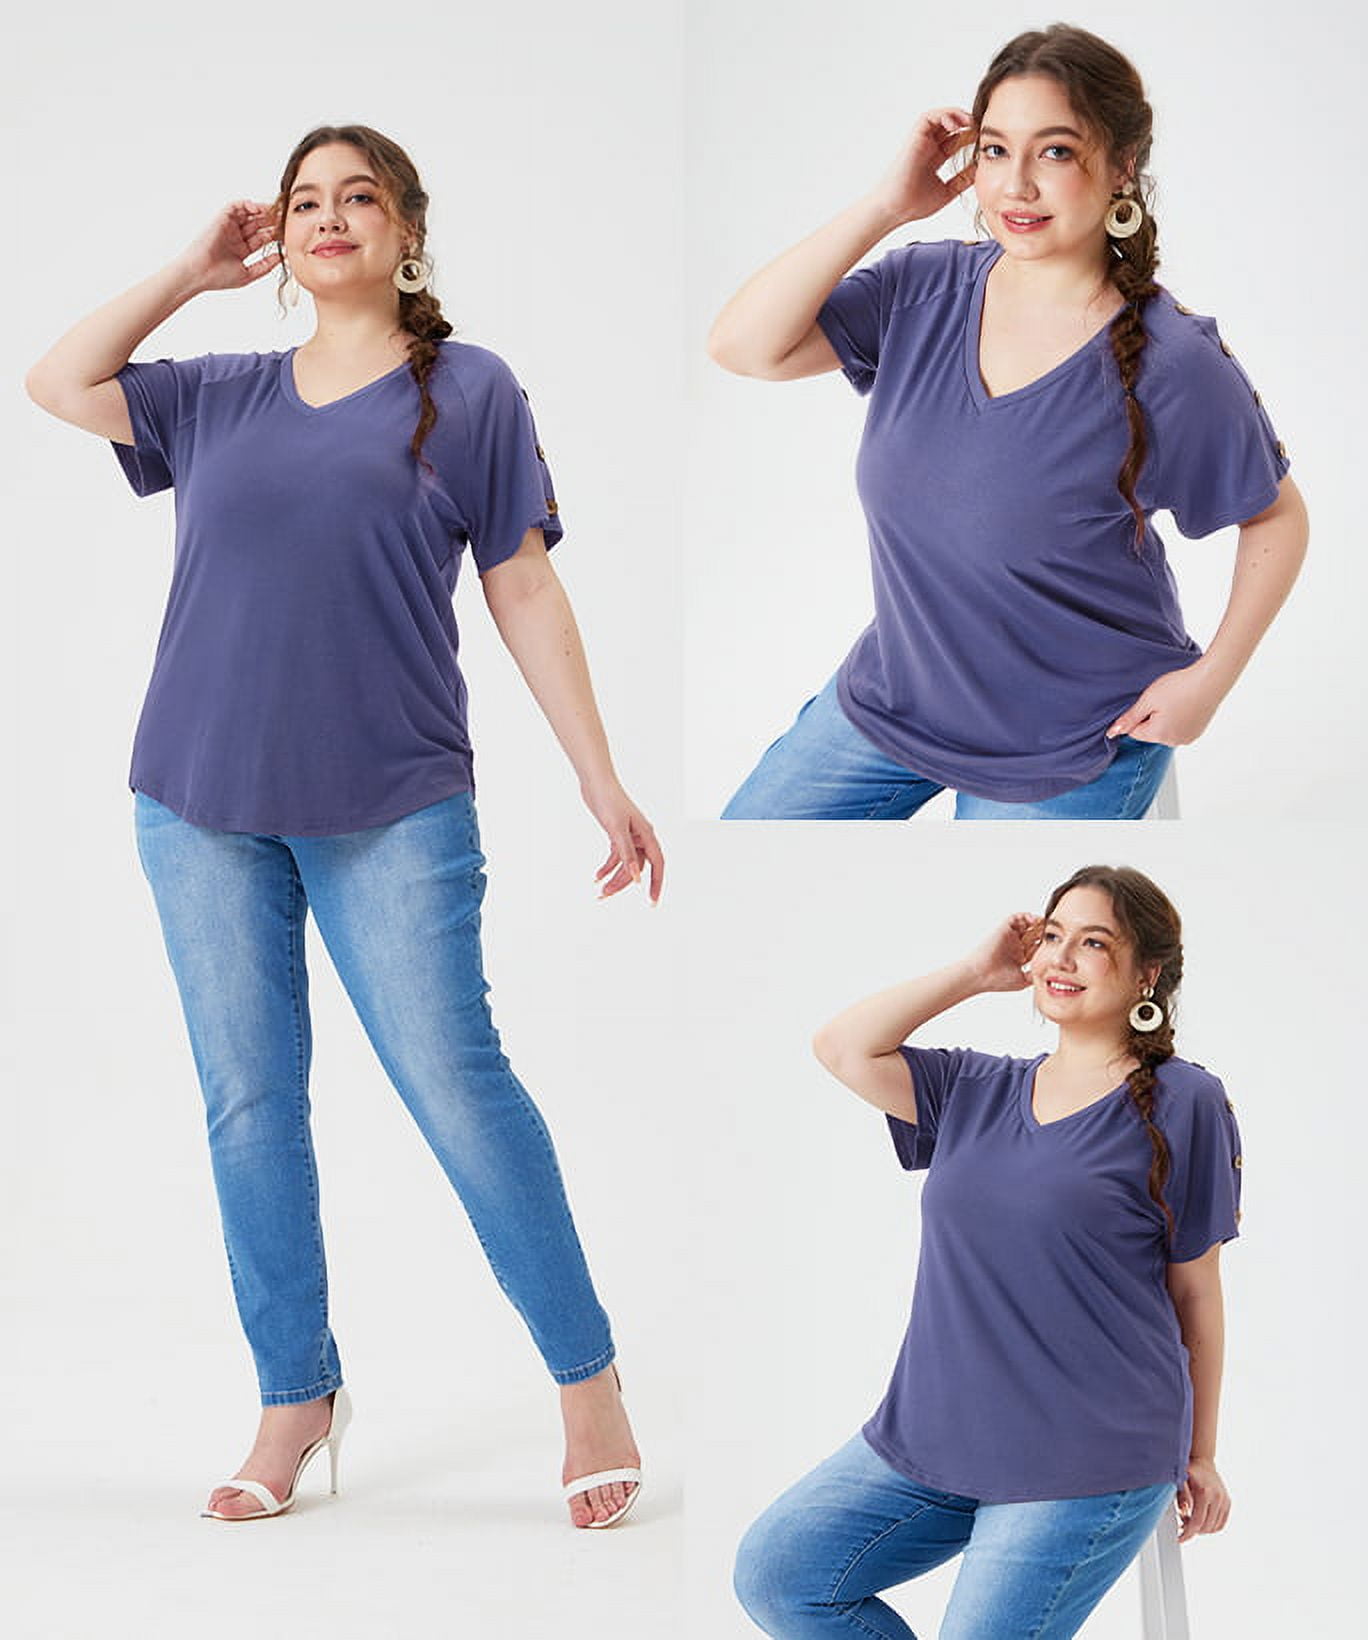 TIYOMI Plus Size 5X Shirts For Women Ruffle Short Sleeve Tops V Neck  Pullover Blue Knitted Summer Tunics 5XL 26W 28W 